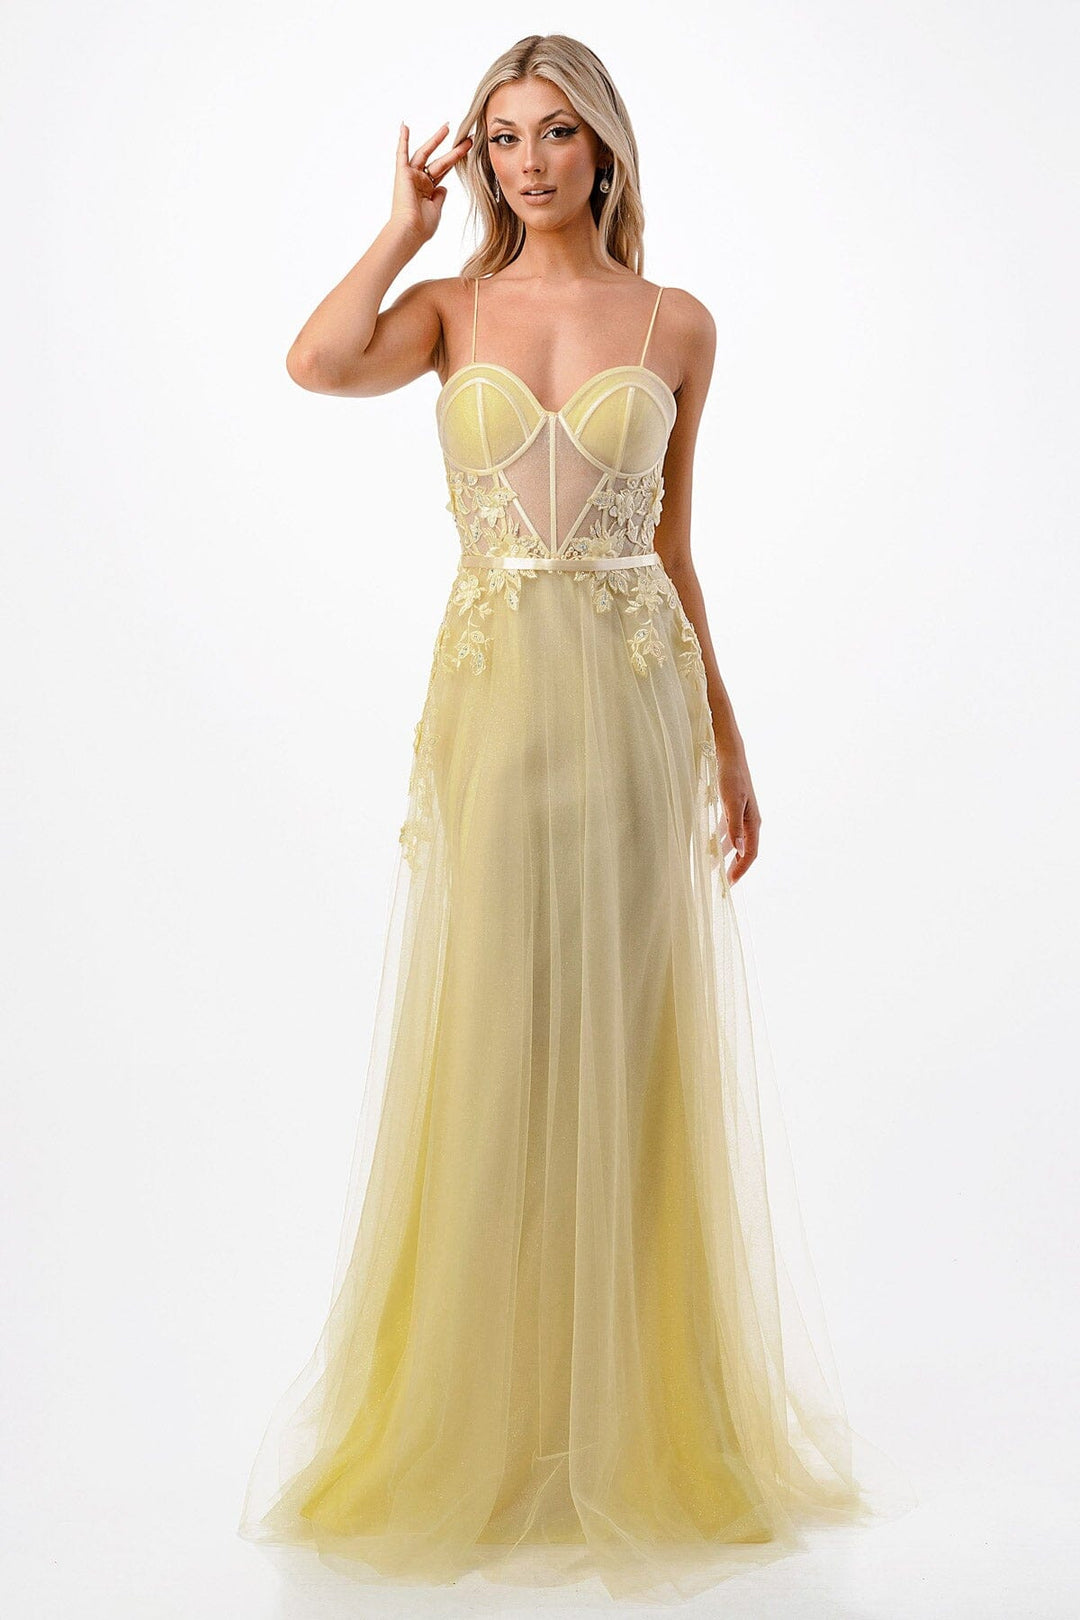 Floral Applique Sheer Bustier Gown by Coya P2110